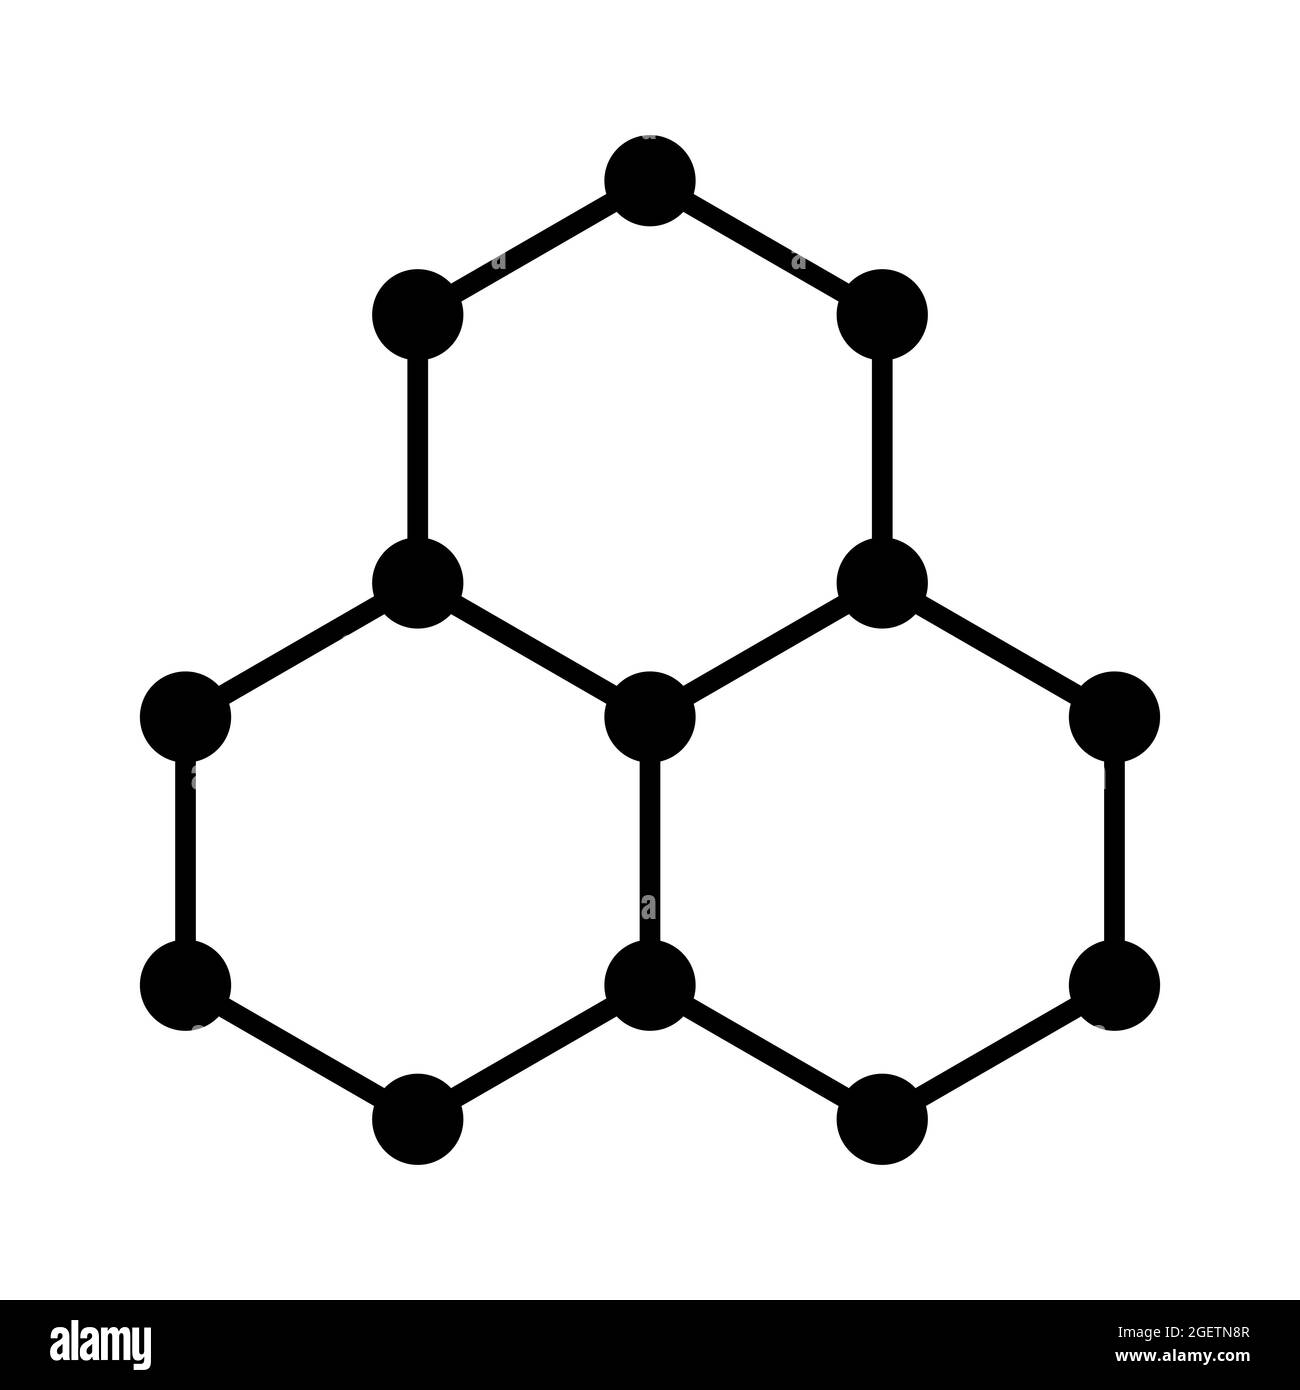 Graphene symbol, schematic molecular structure of graphene, allotrope of carbon, consisting of a single layer of carbon atoms in a hexagonal grid. Stock Photo